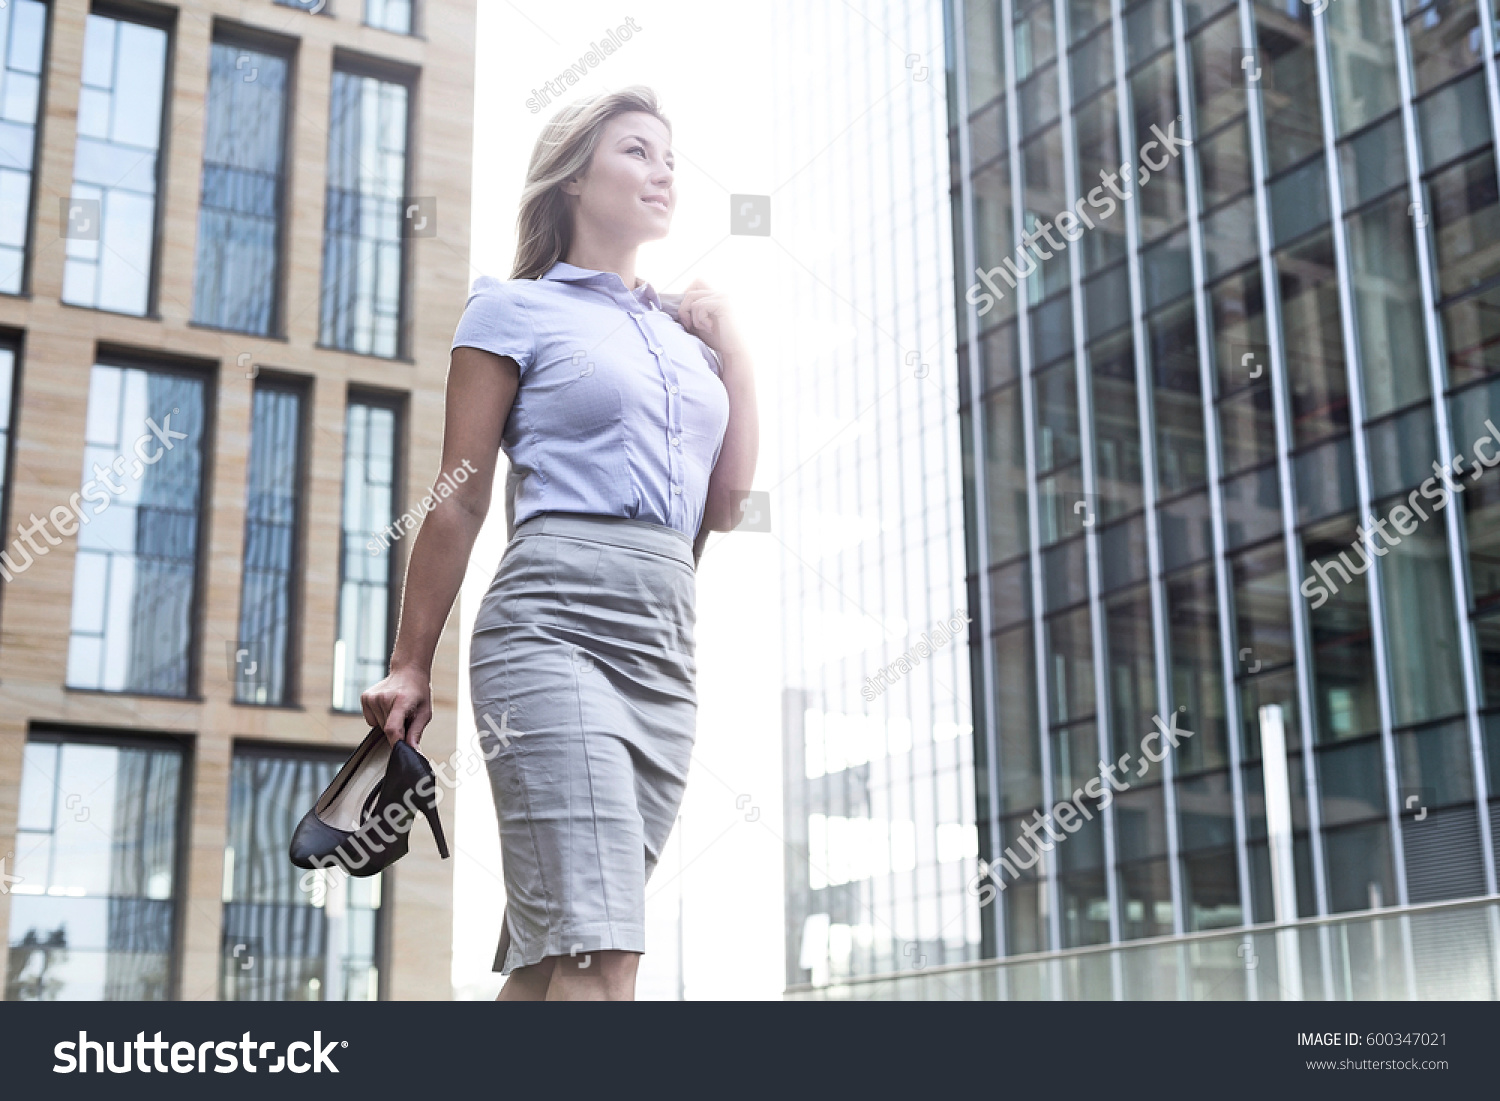 Low angle view of confident businesswoman holding high heels while standing outside office buildings #600347021